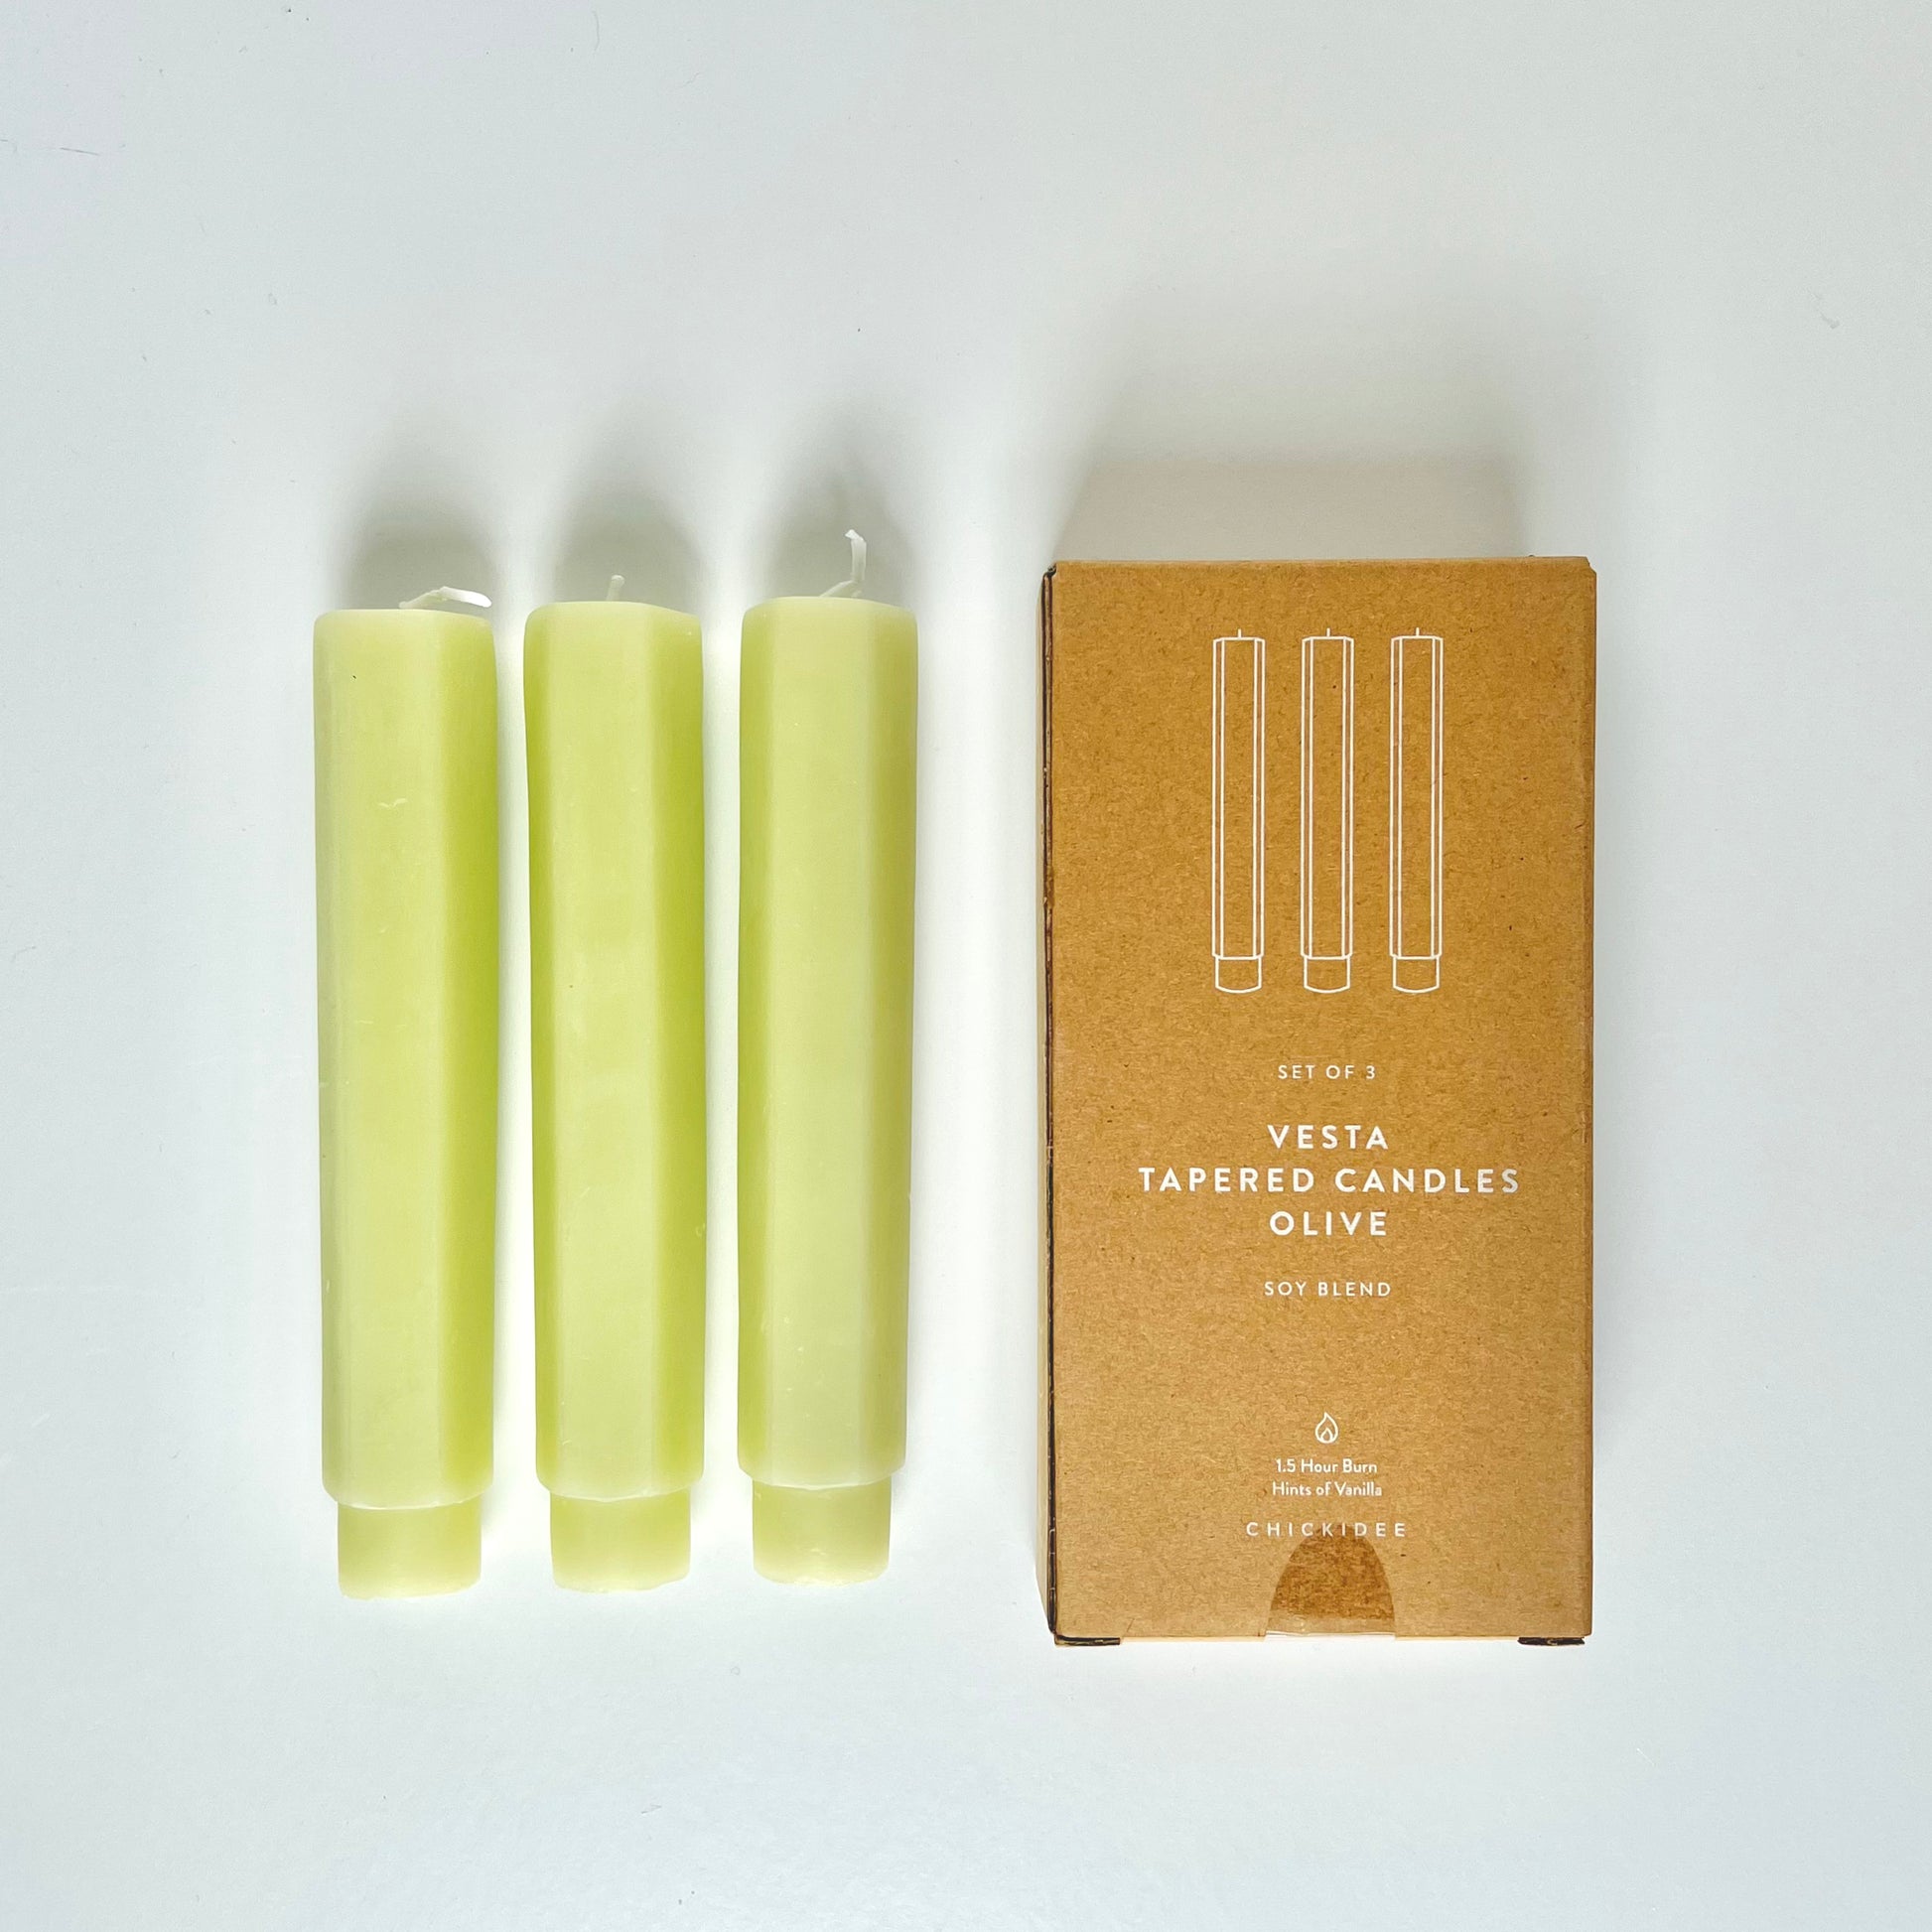 Three melon taper candles shown from overhead with their brown cardboard box next to them